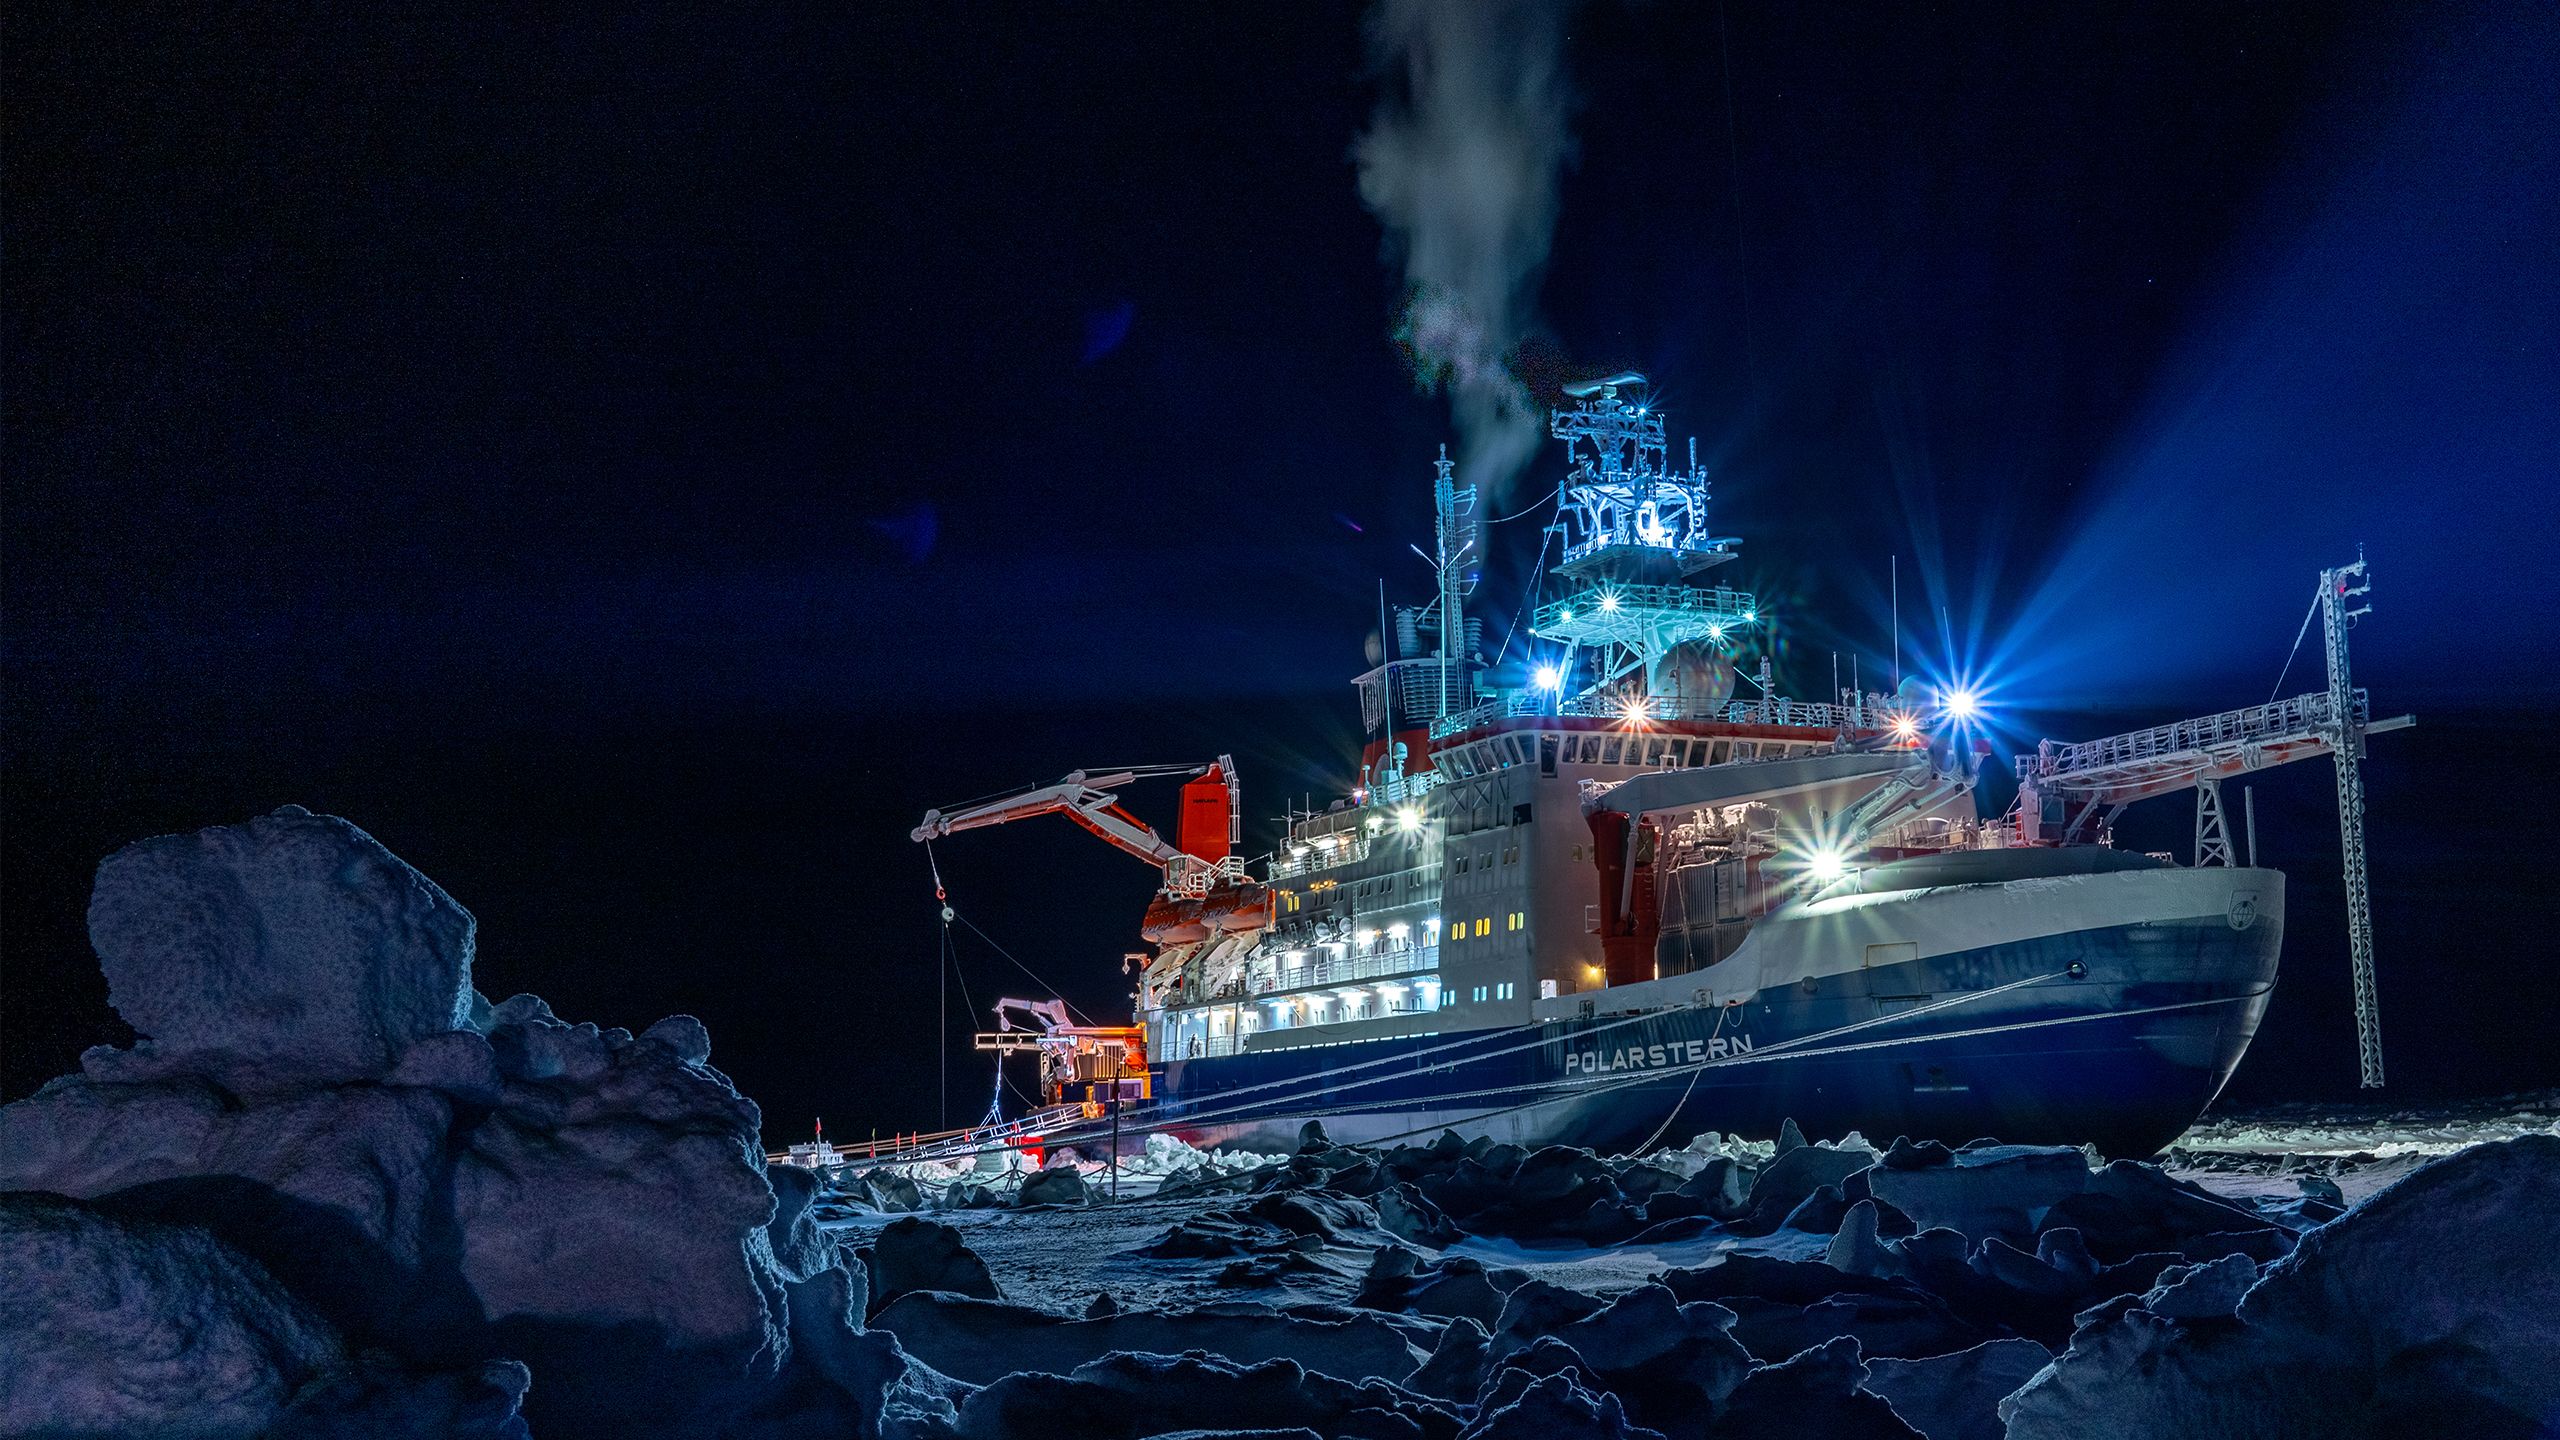 The Polarstern research vessel photographed in darkness while trapped in ice over the Arctic winter